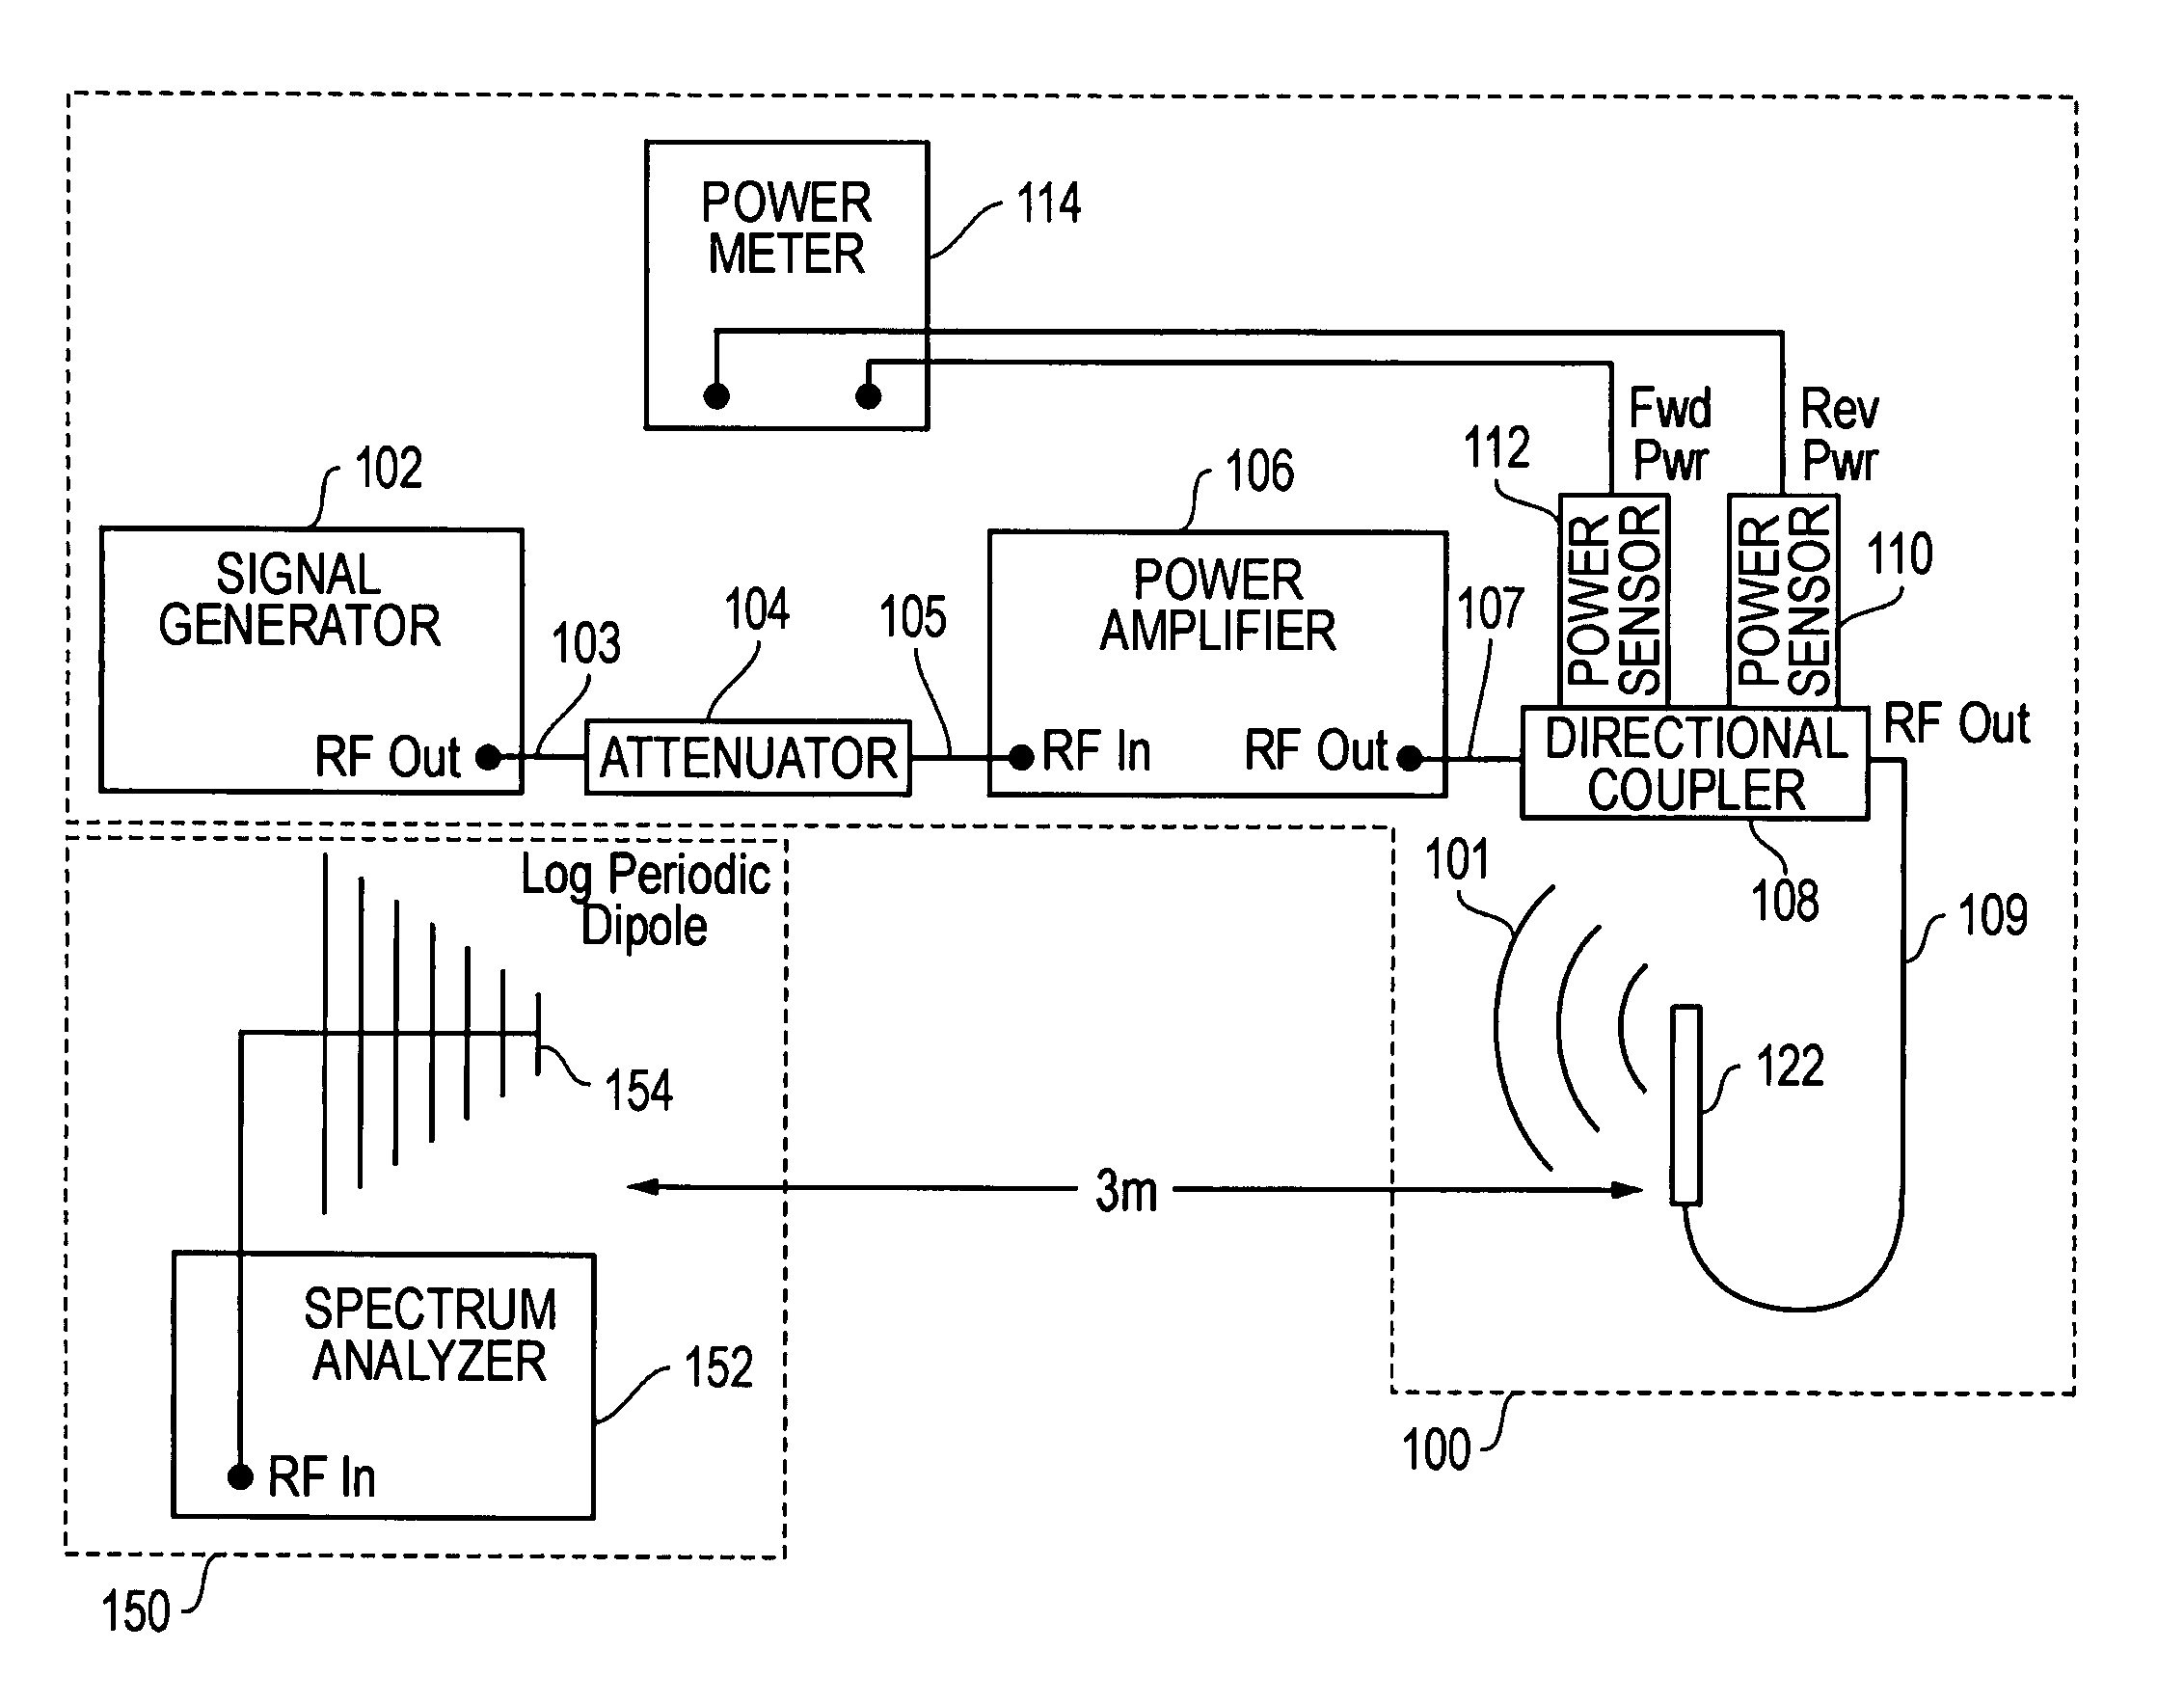 Systems and methods for evaluating electromagnetic interference